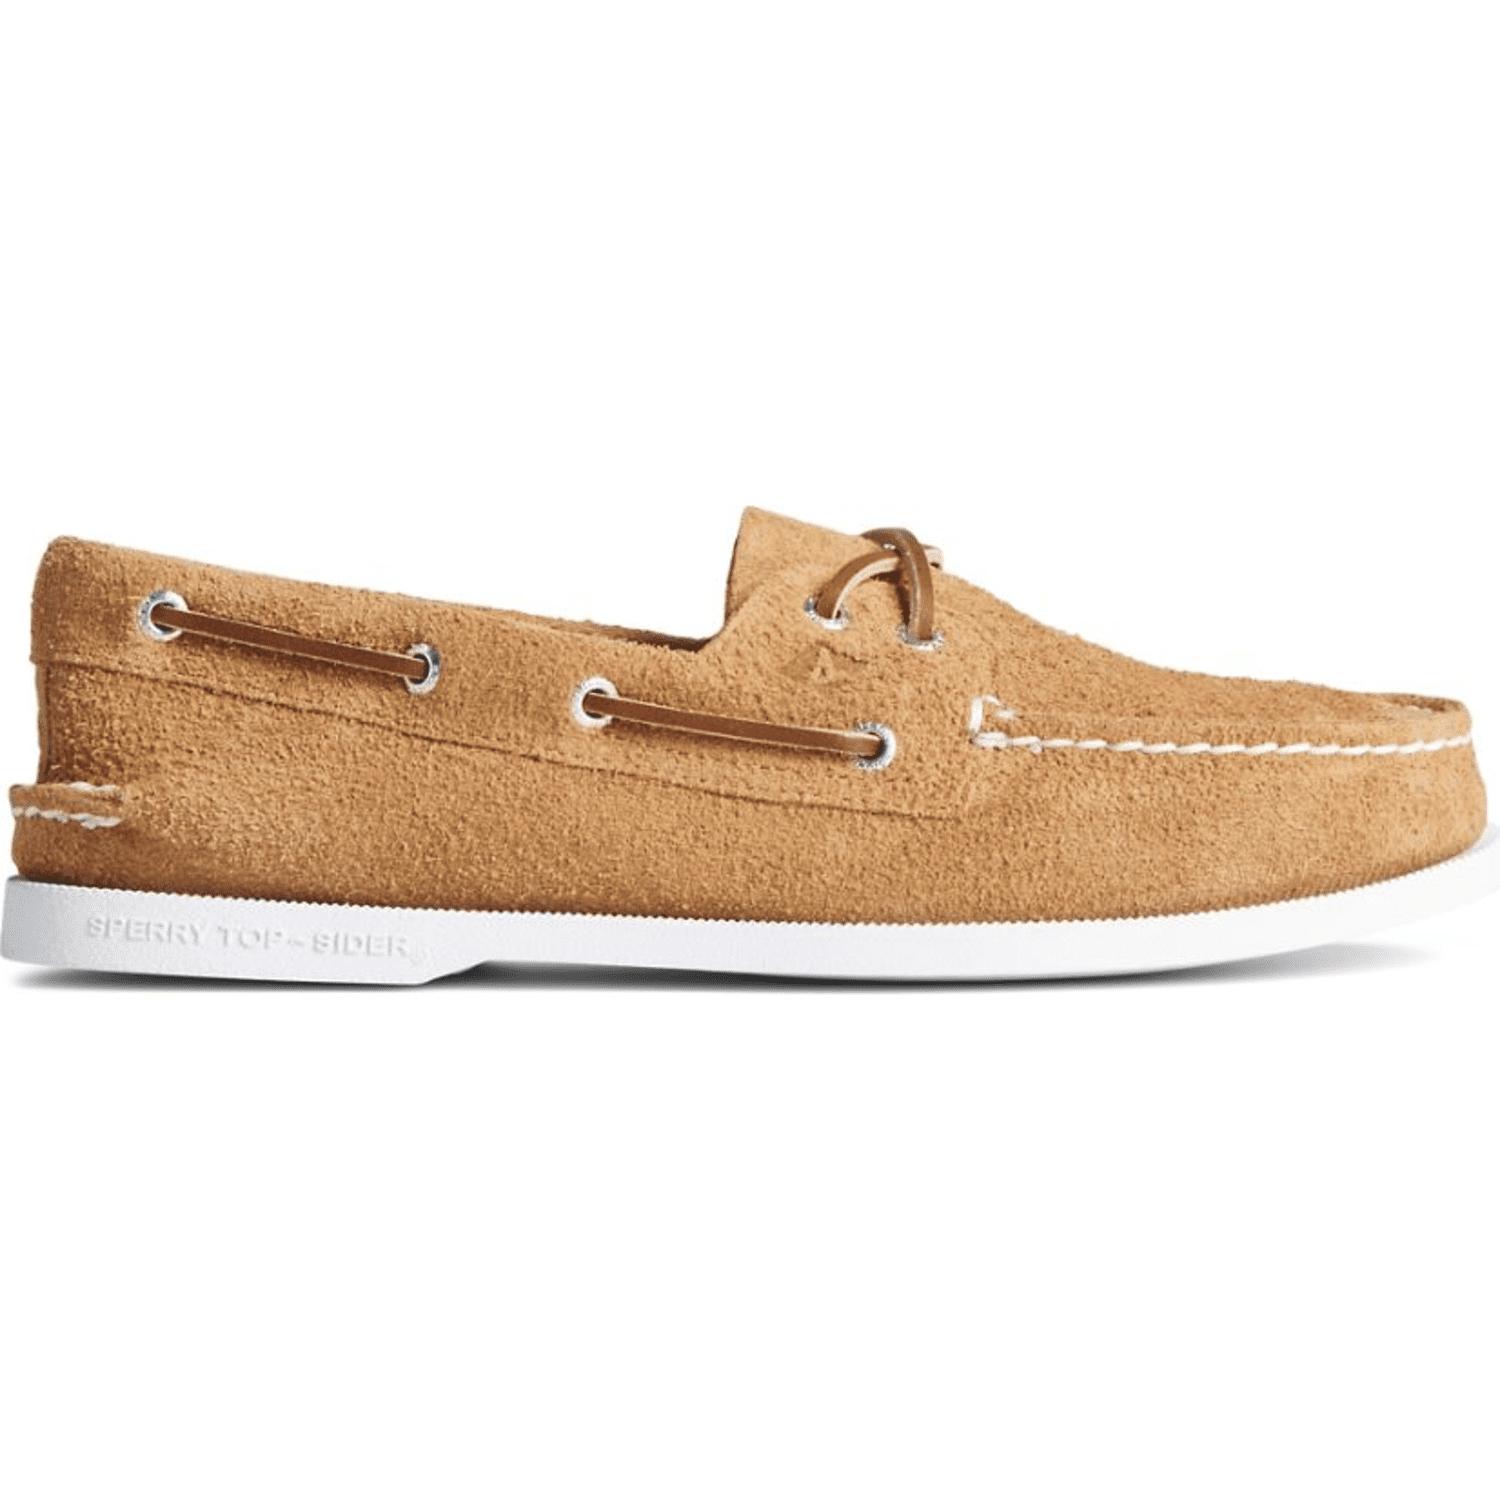 Sperry Top-Sider Topsider Authentic Original 2-eye Suede Tan in Natural ...